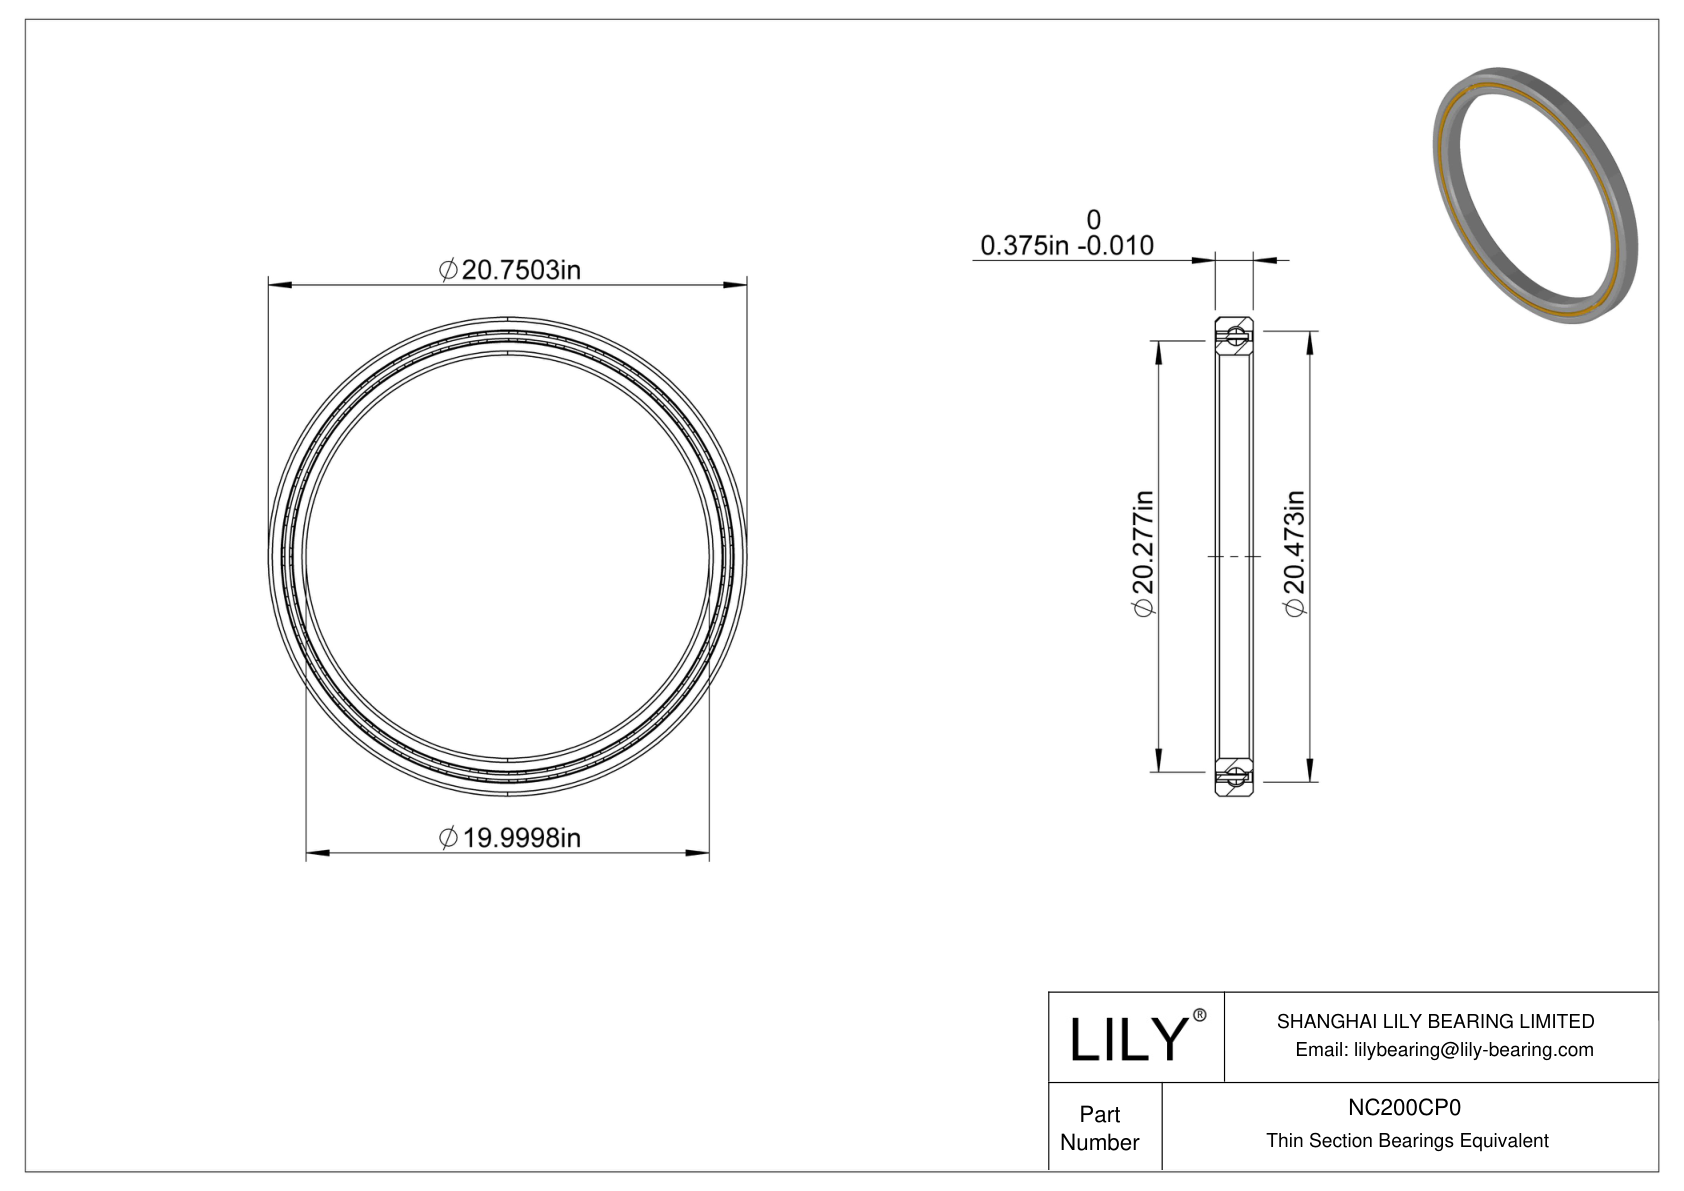 NC200CP0 Constant Section (CS) Bearings cad drawing